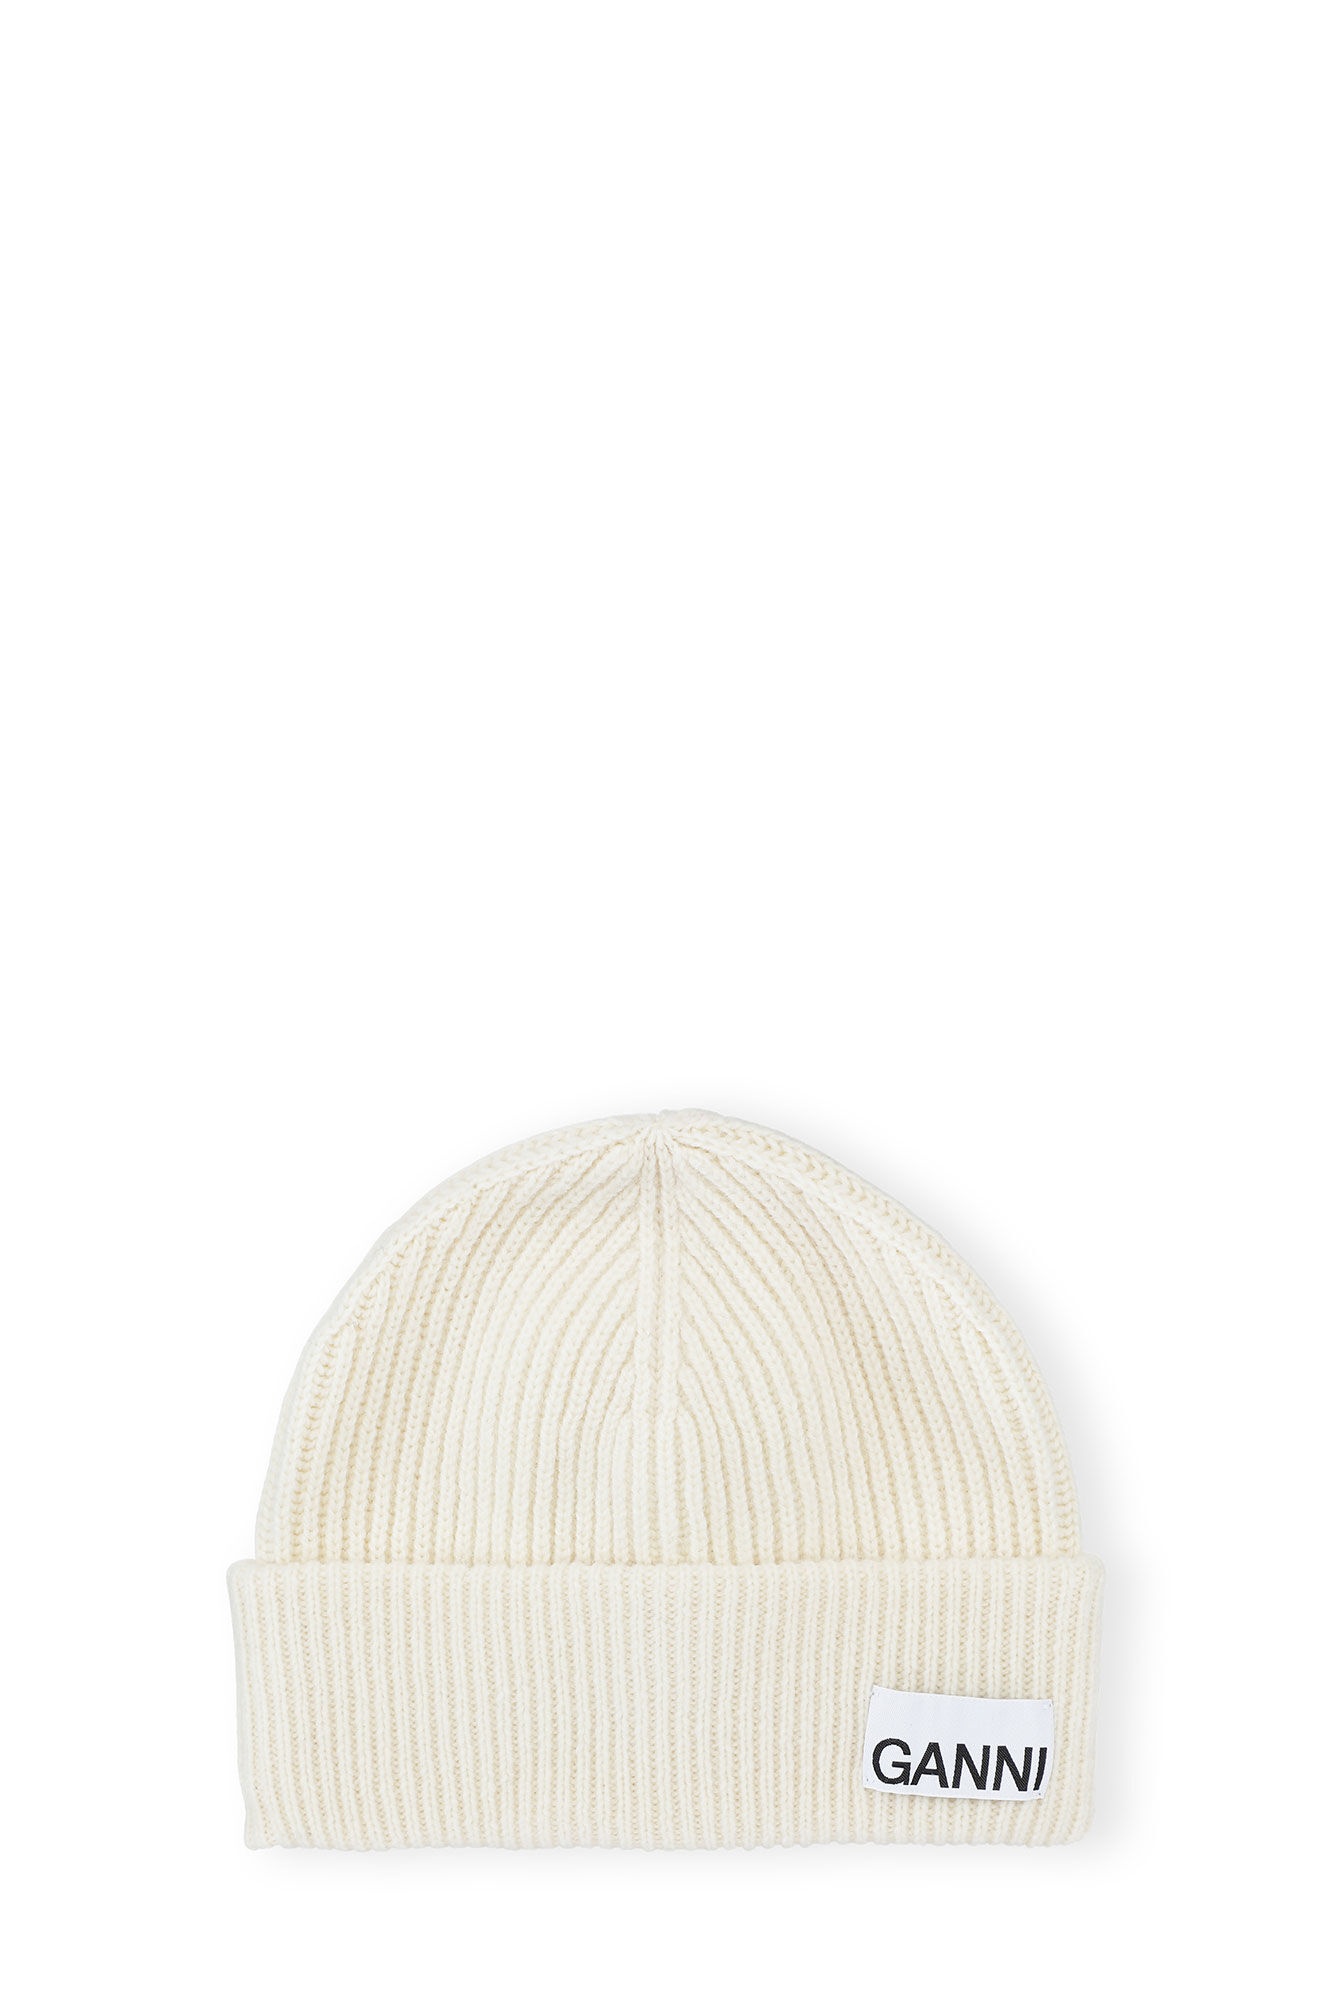 WHITE FITTED WOOL RIB KNIT BEANIE - 1